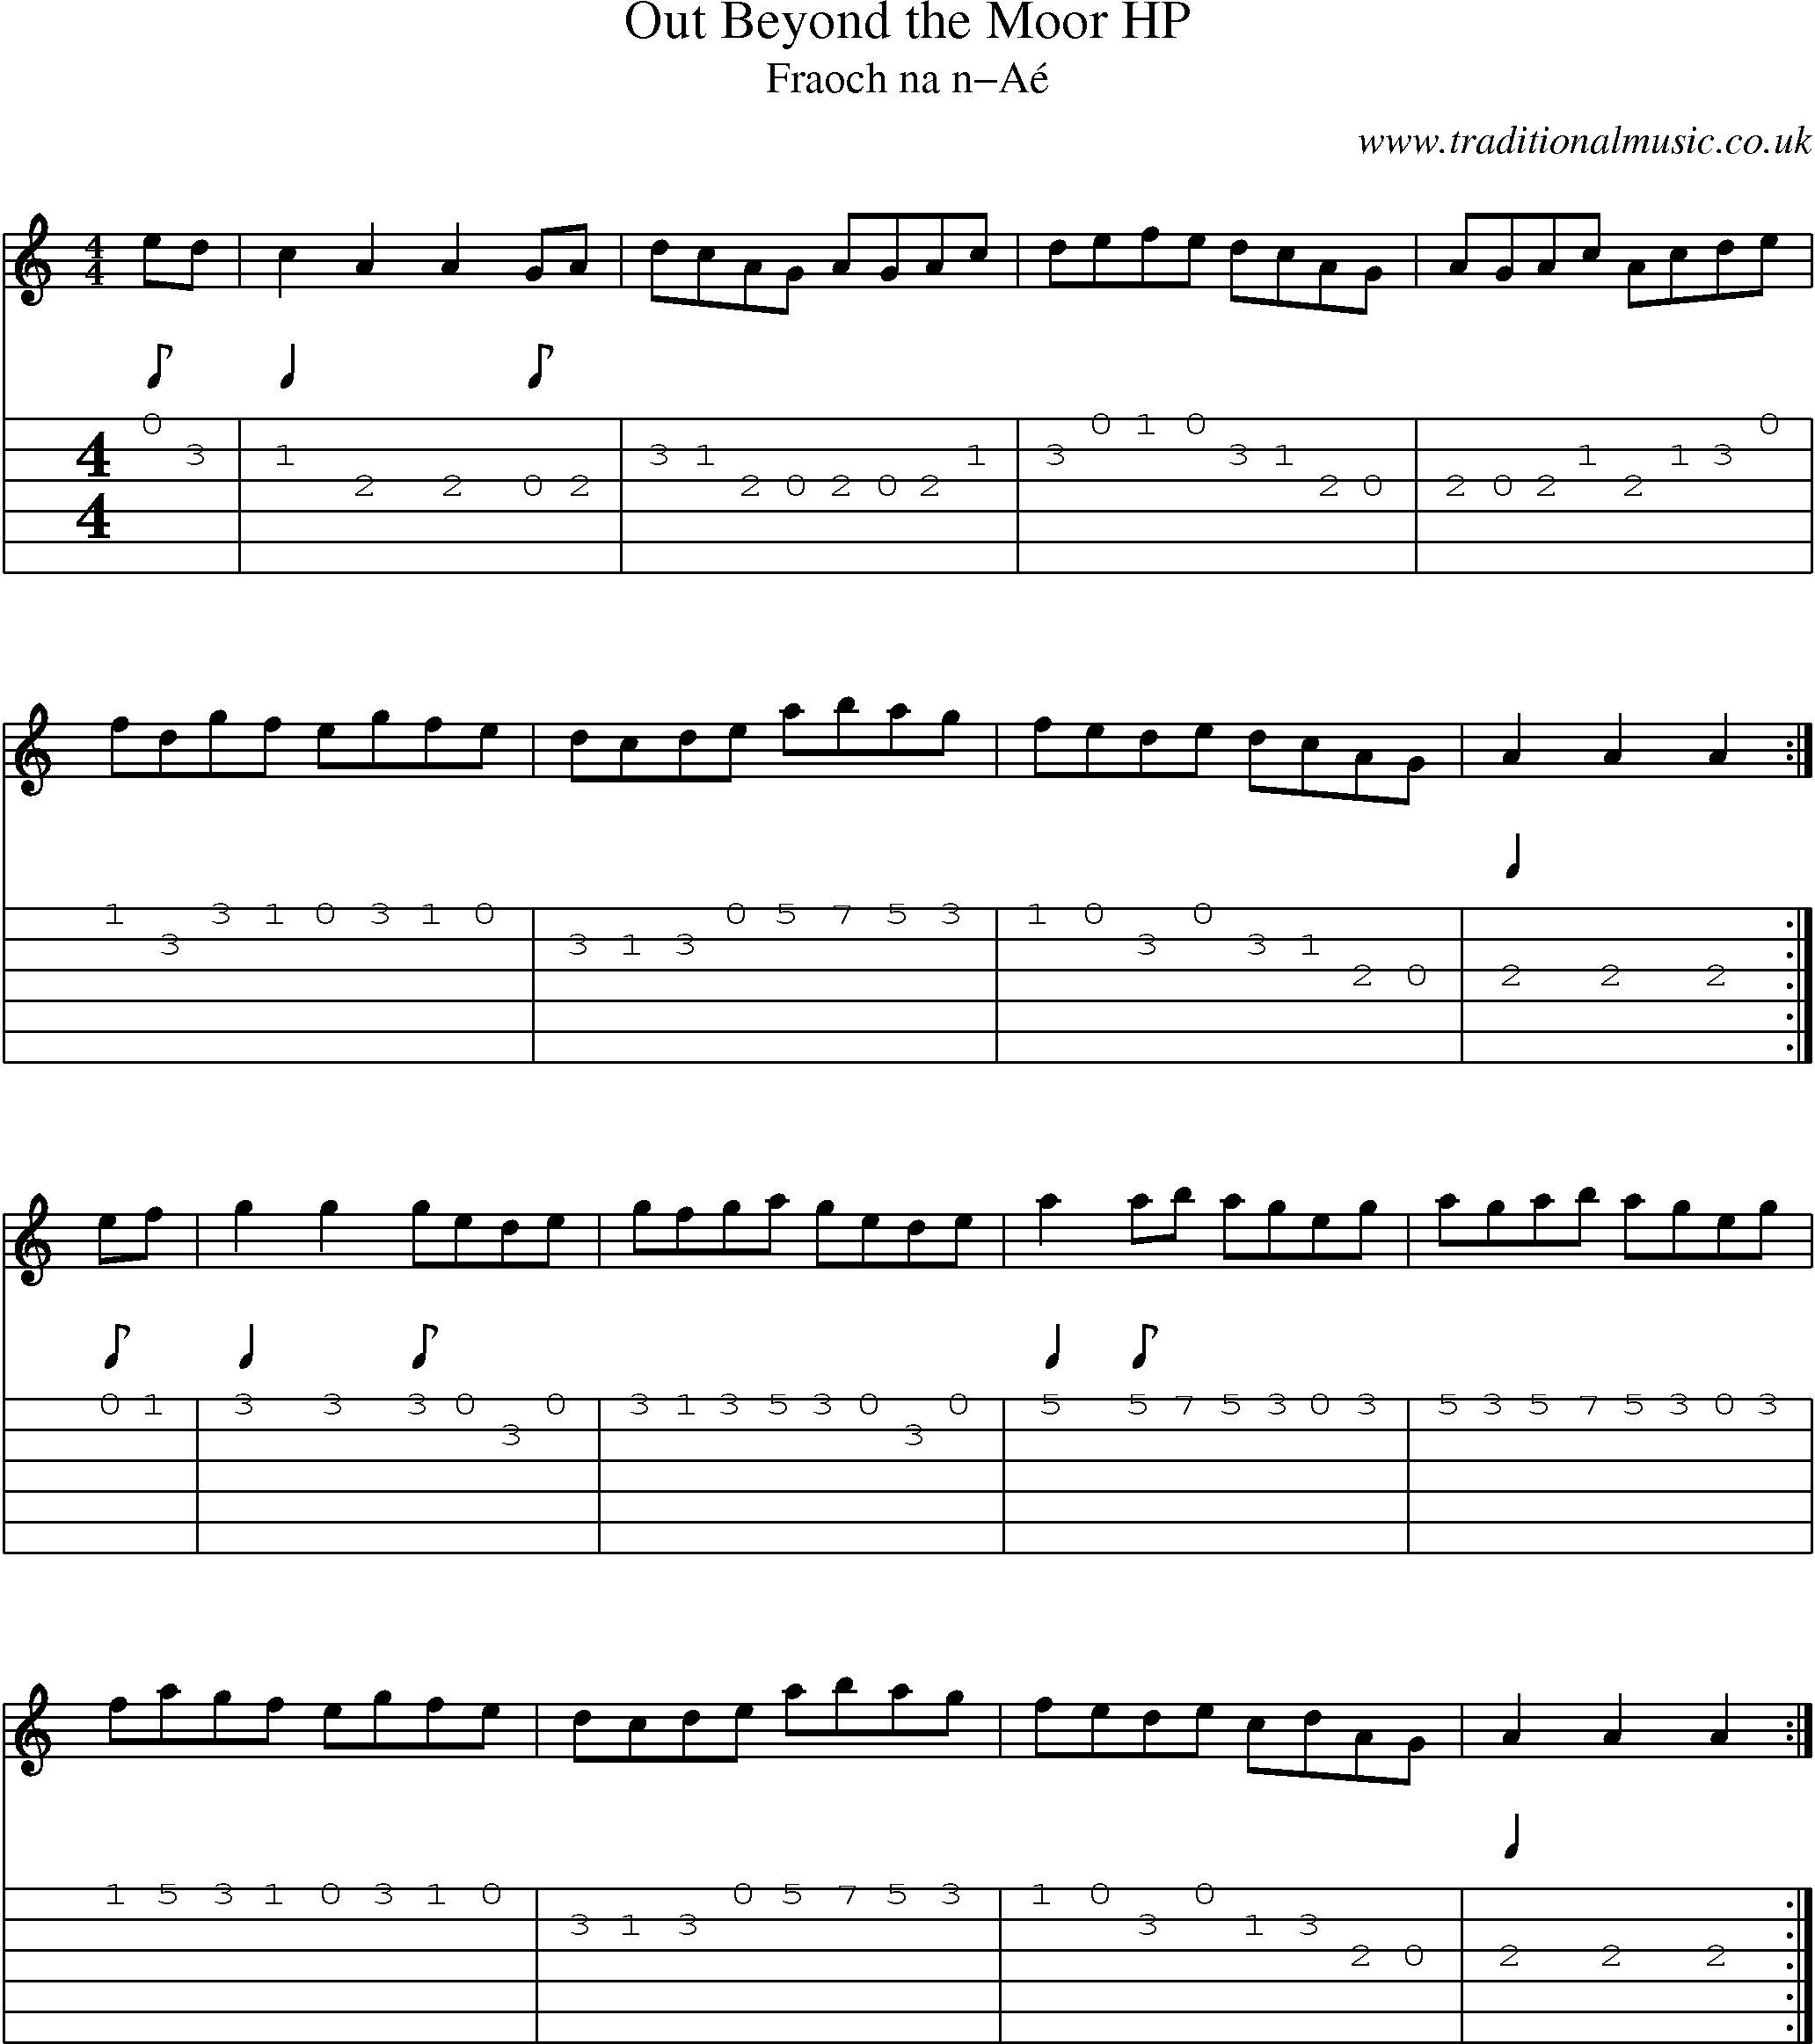 Music Score and Guitar Tabs for Out Beyond Moor